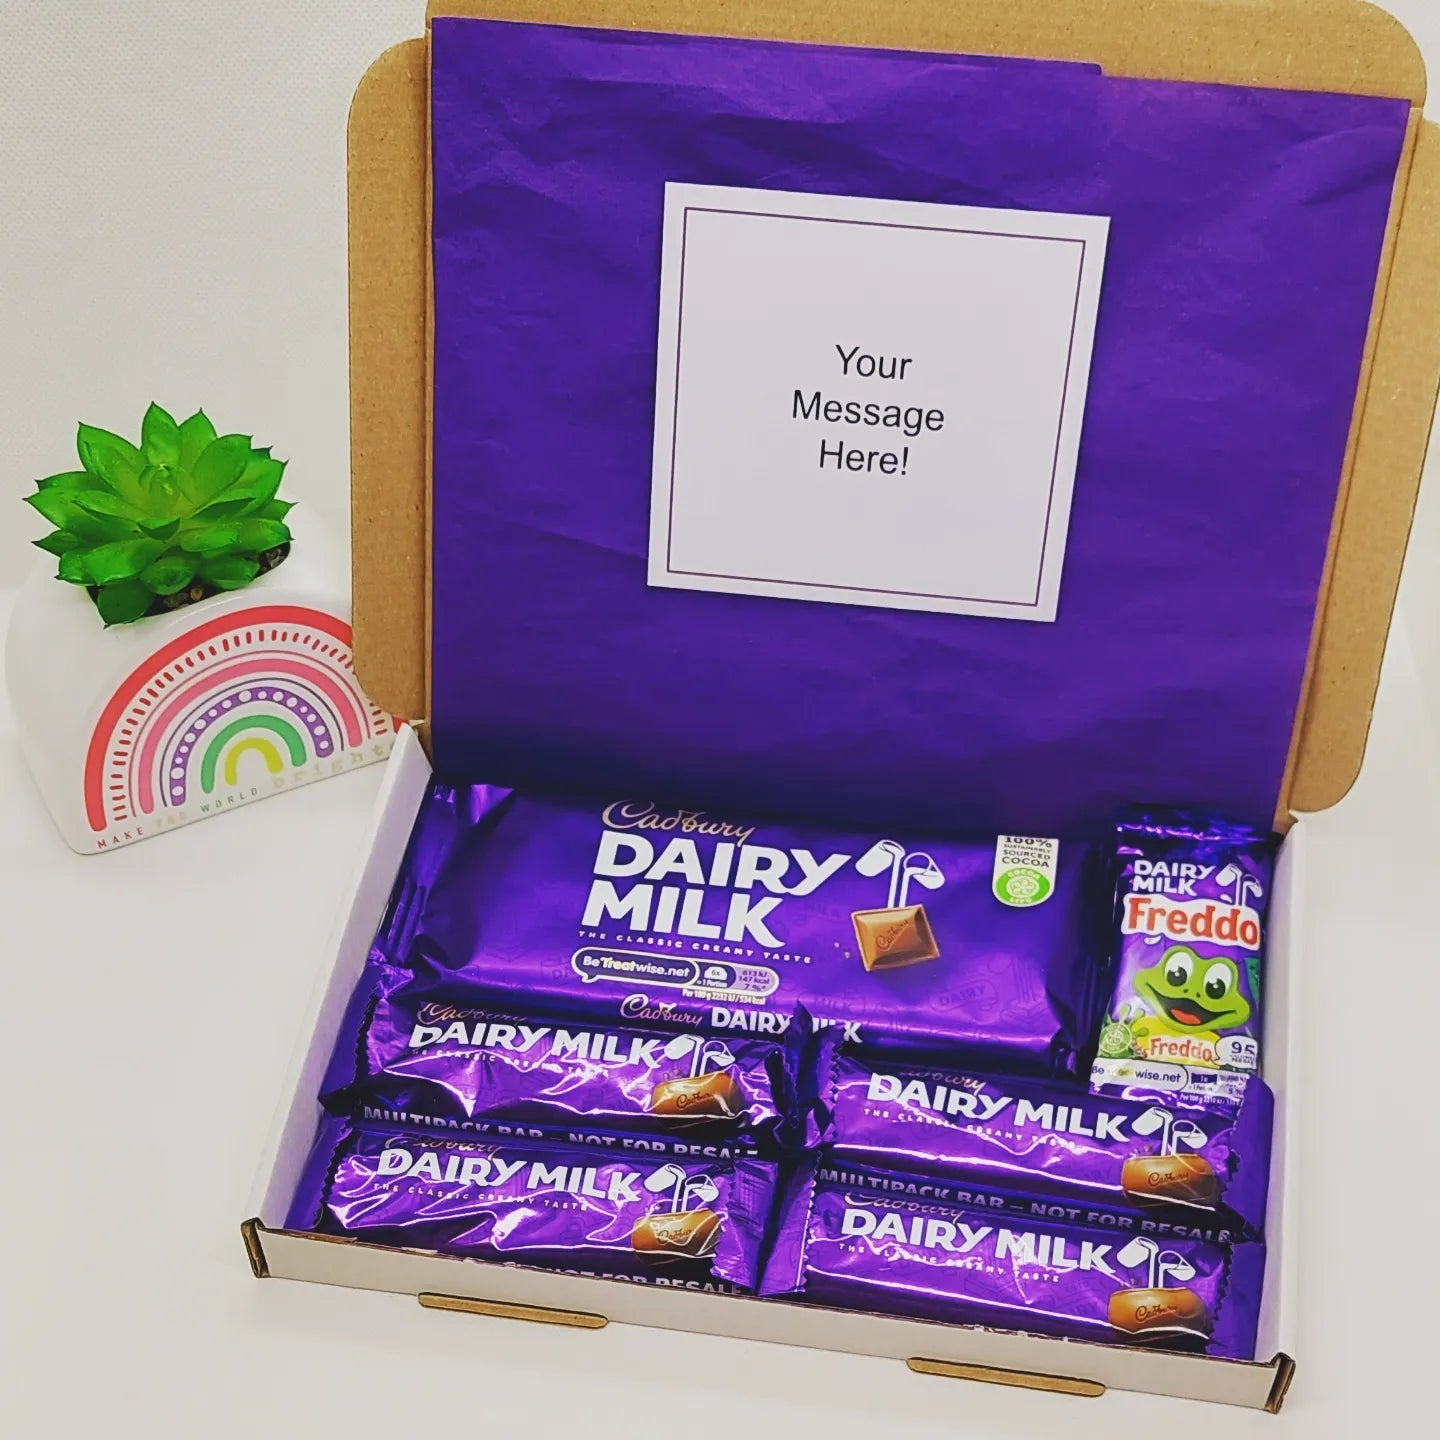 Dairy Milk Letterbox Gift – Chocolate Gift Set UK – The Happiness Box Fruit & Nut